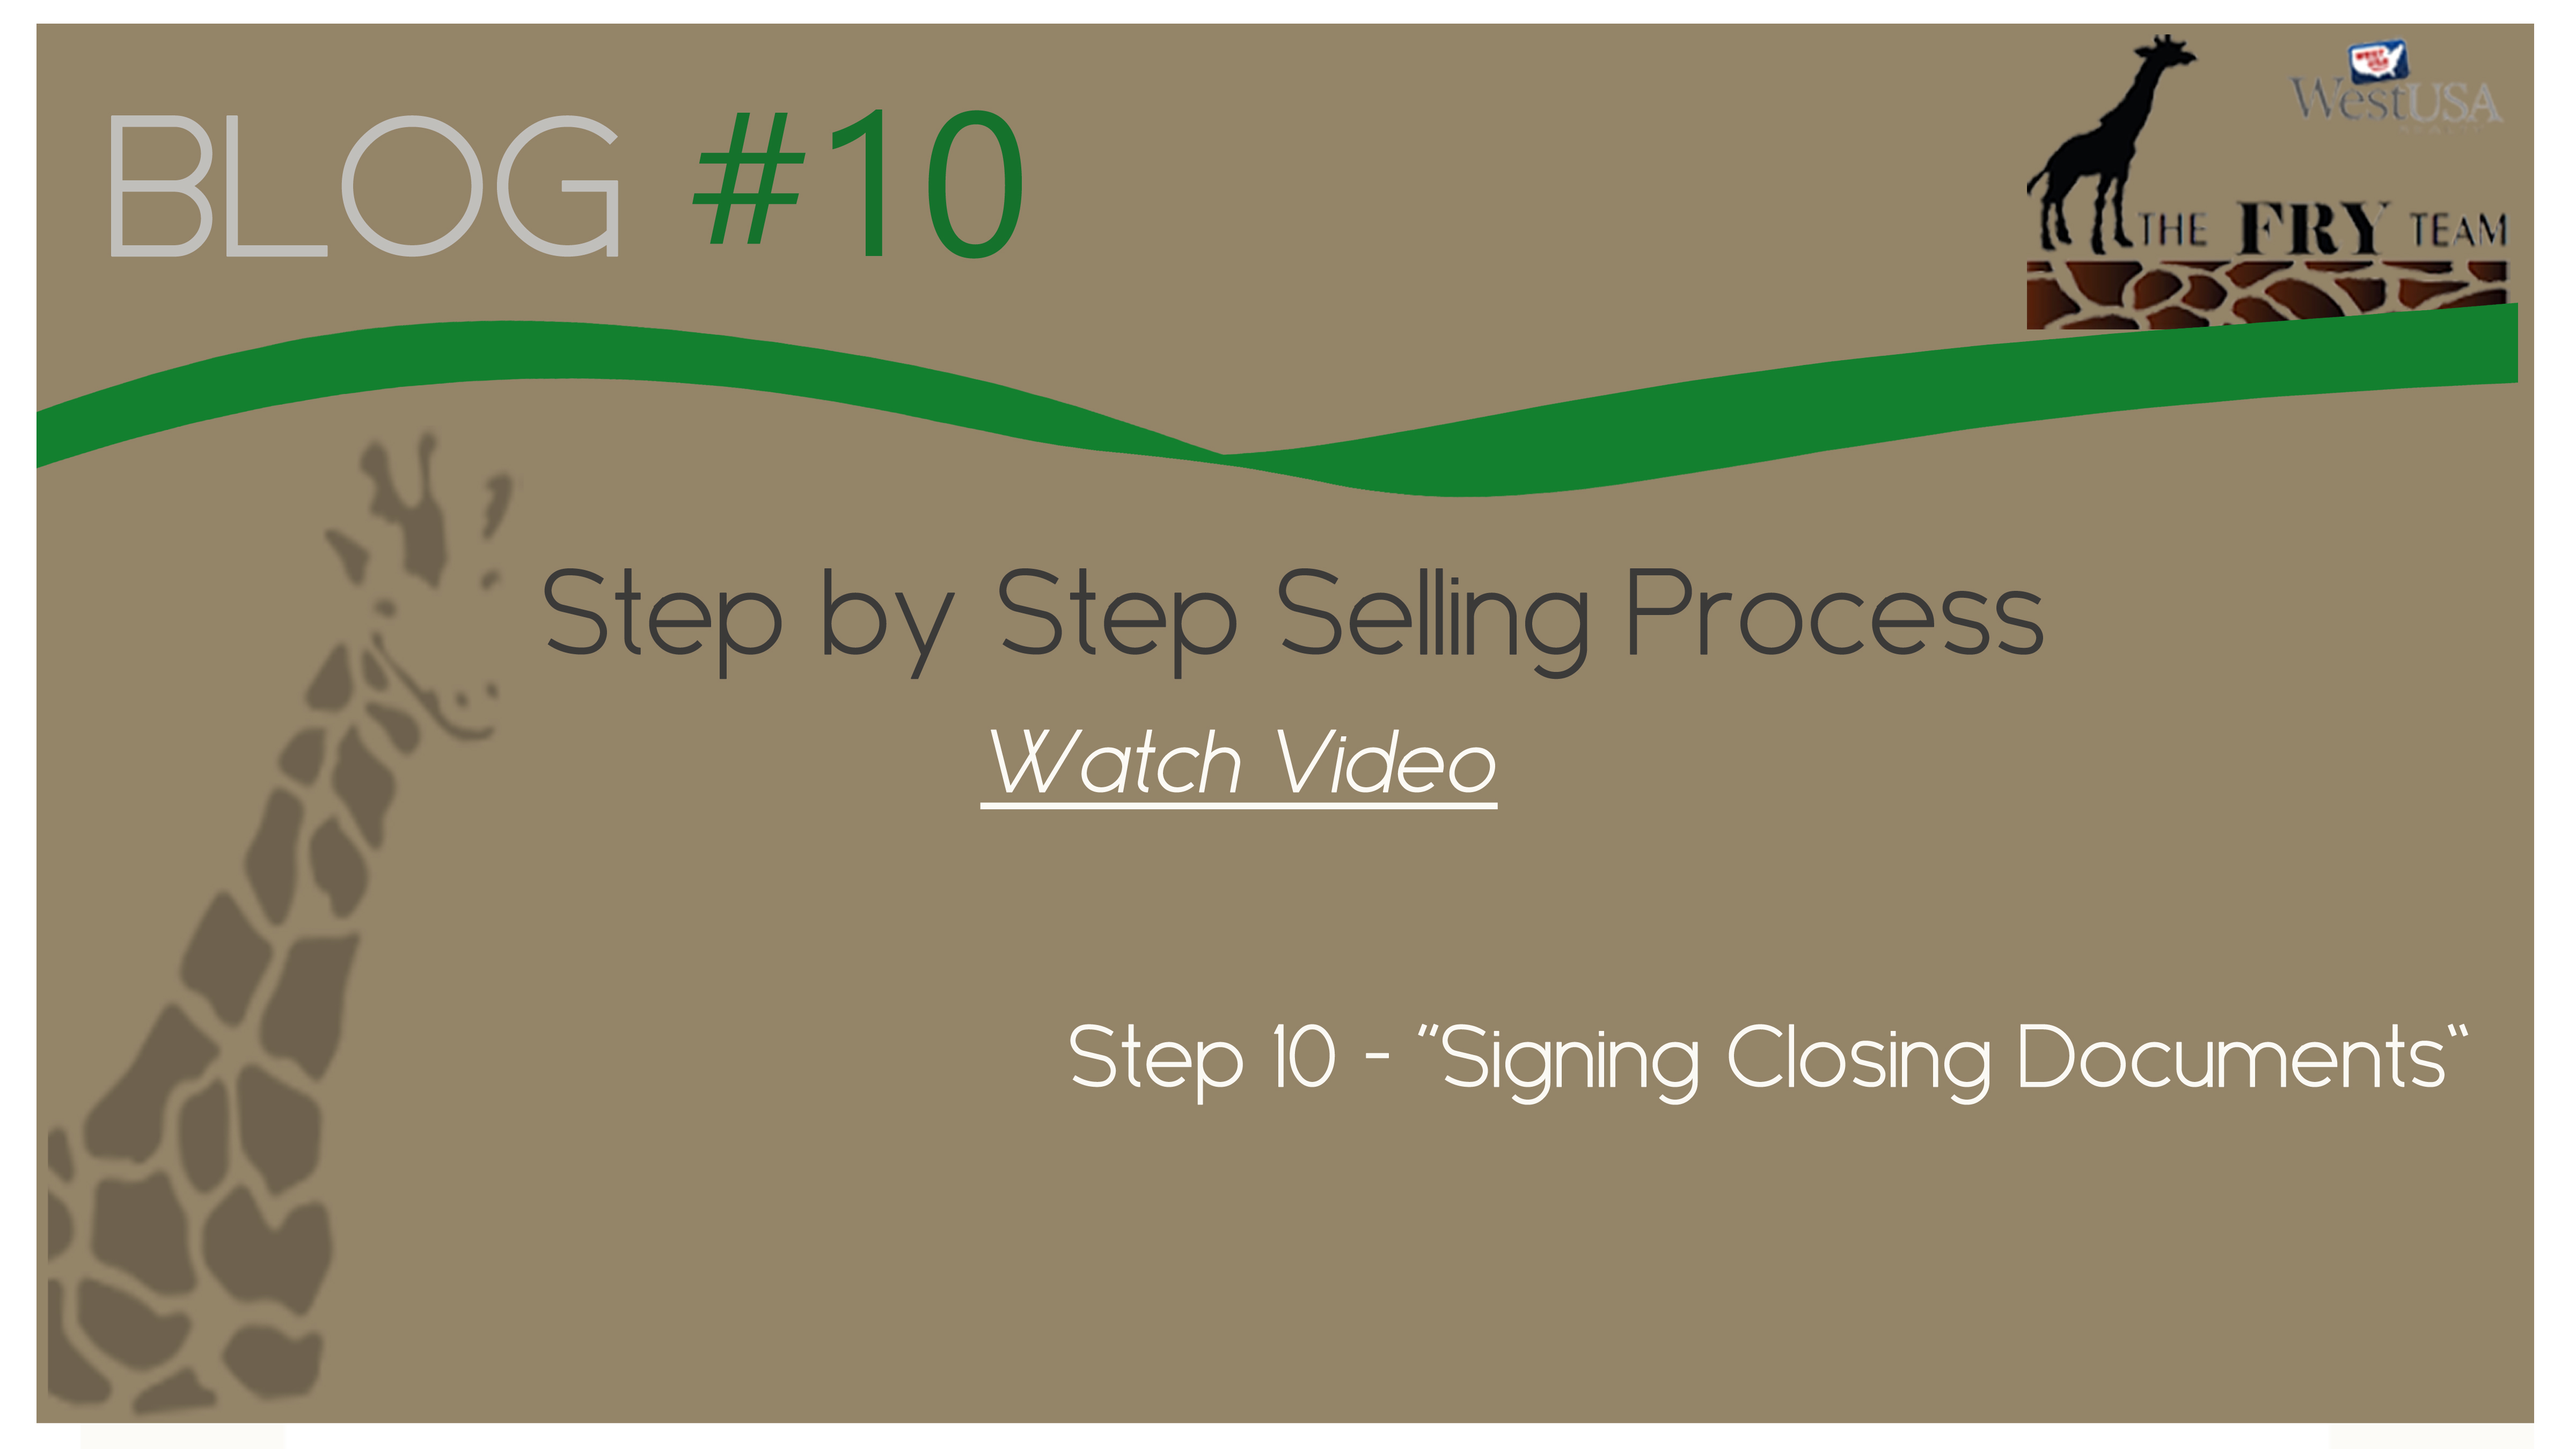 Step 10 – Signing Closing Documents